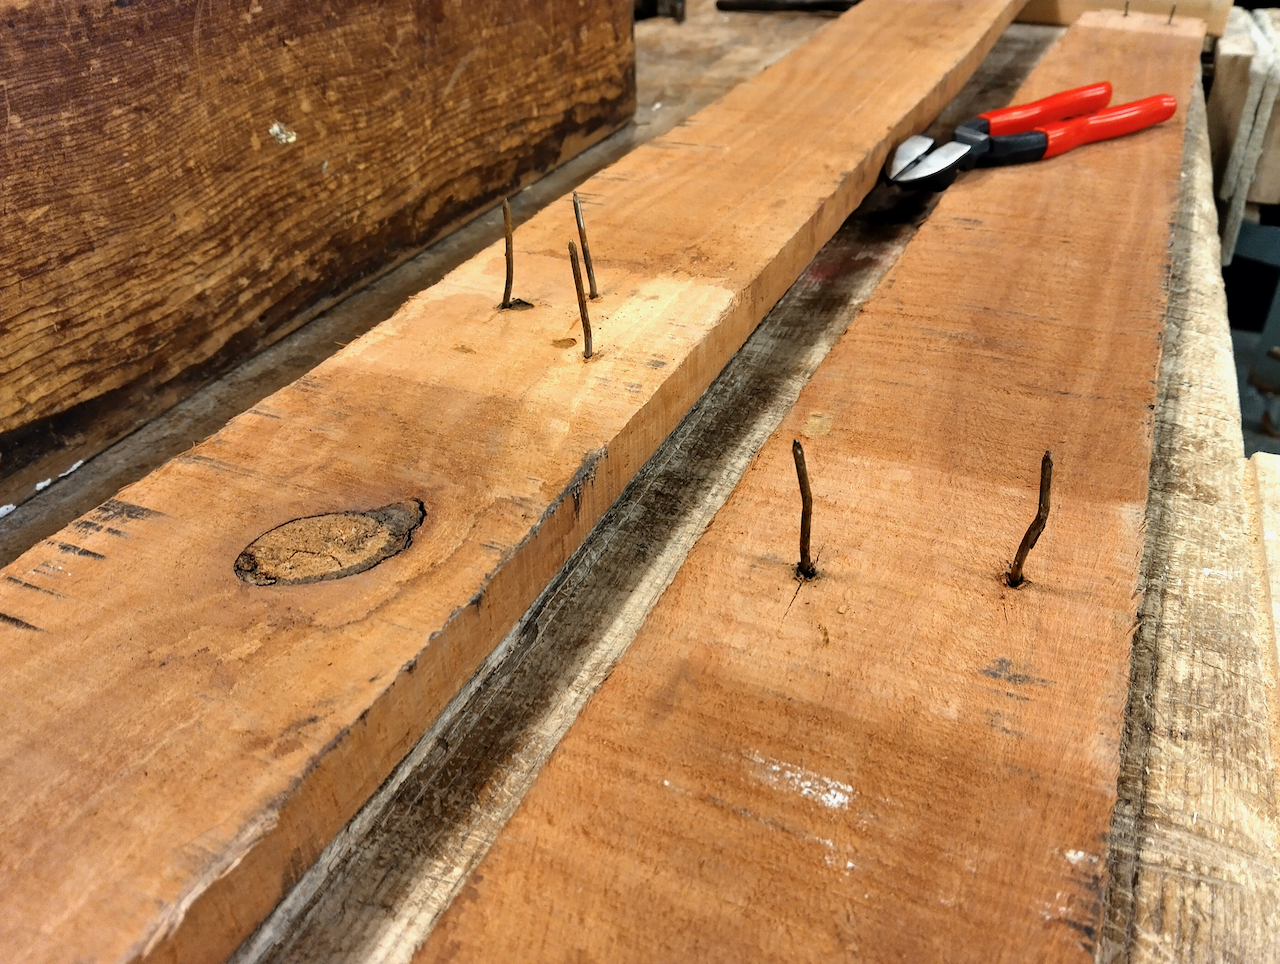 Nails sticking straight up through a board, with pliers sitting in the background.